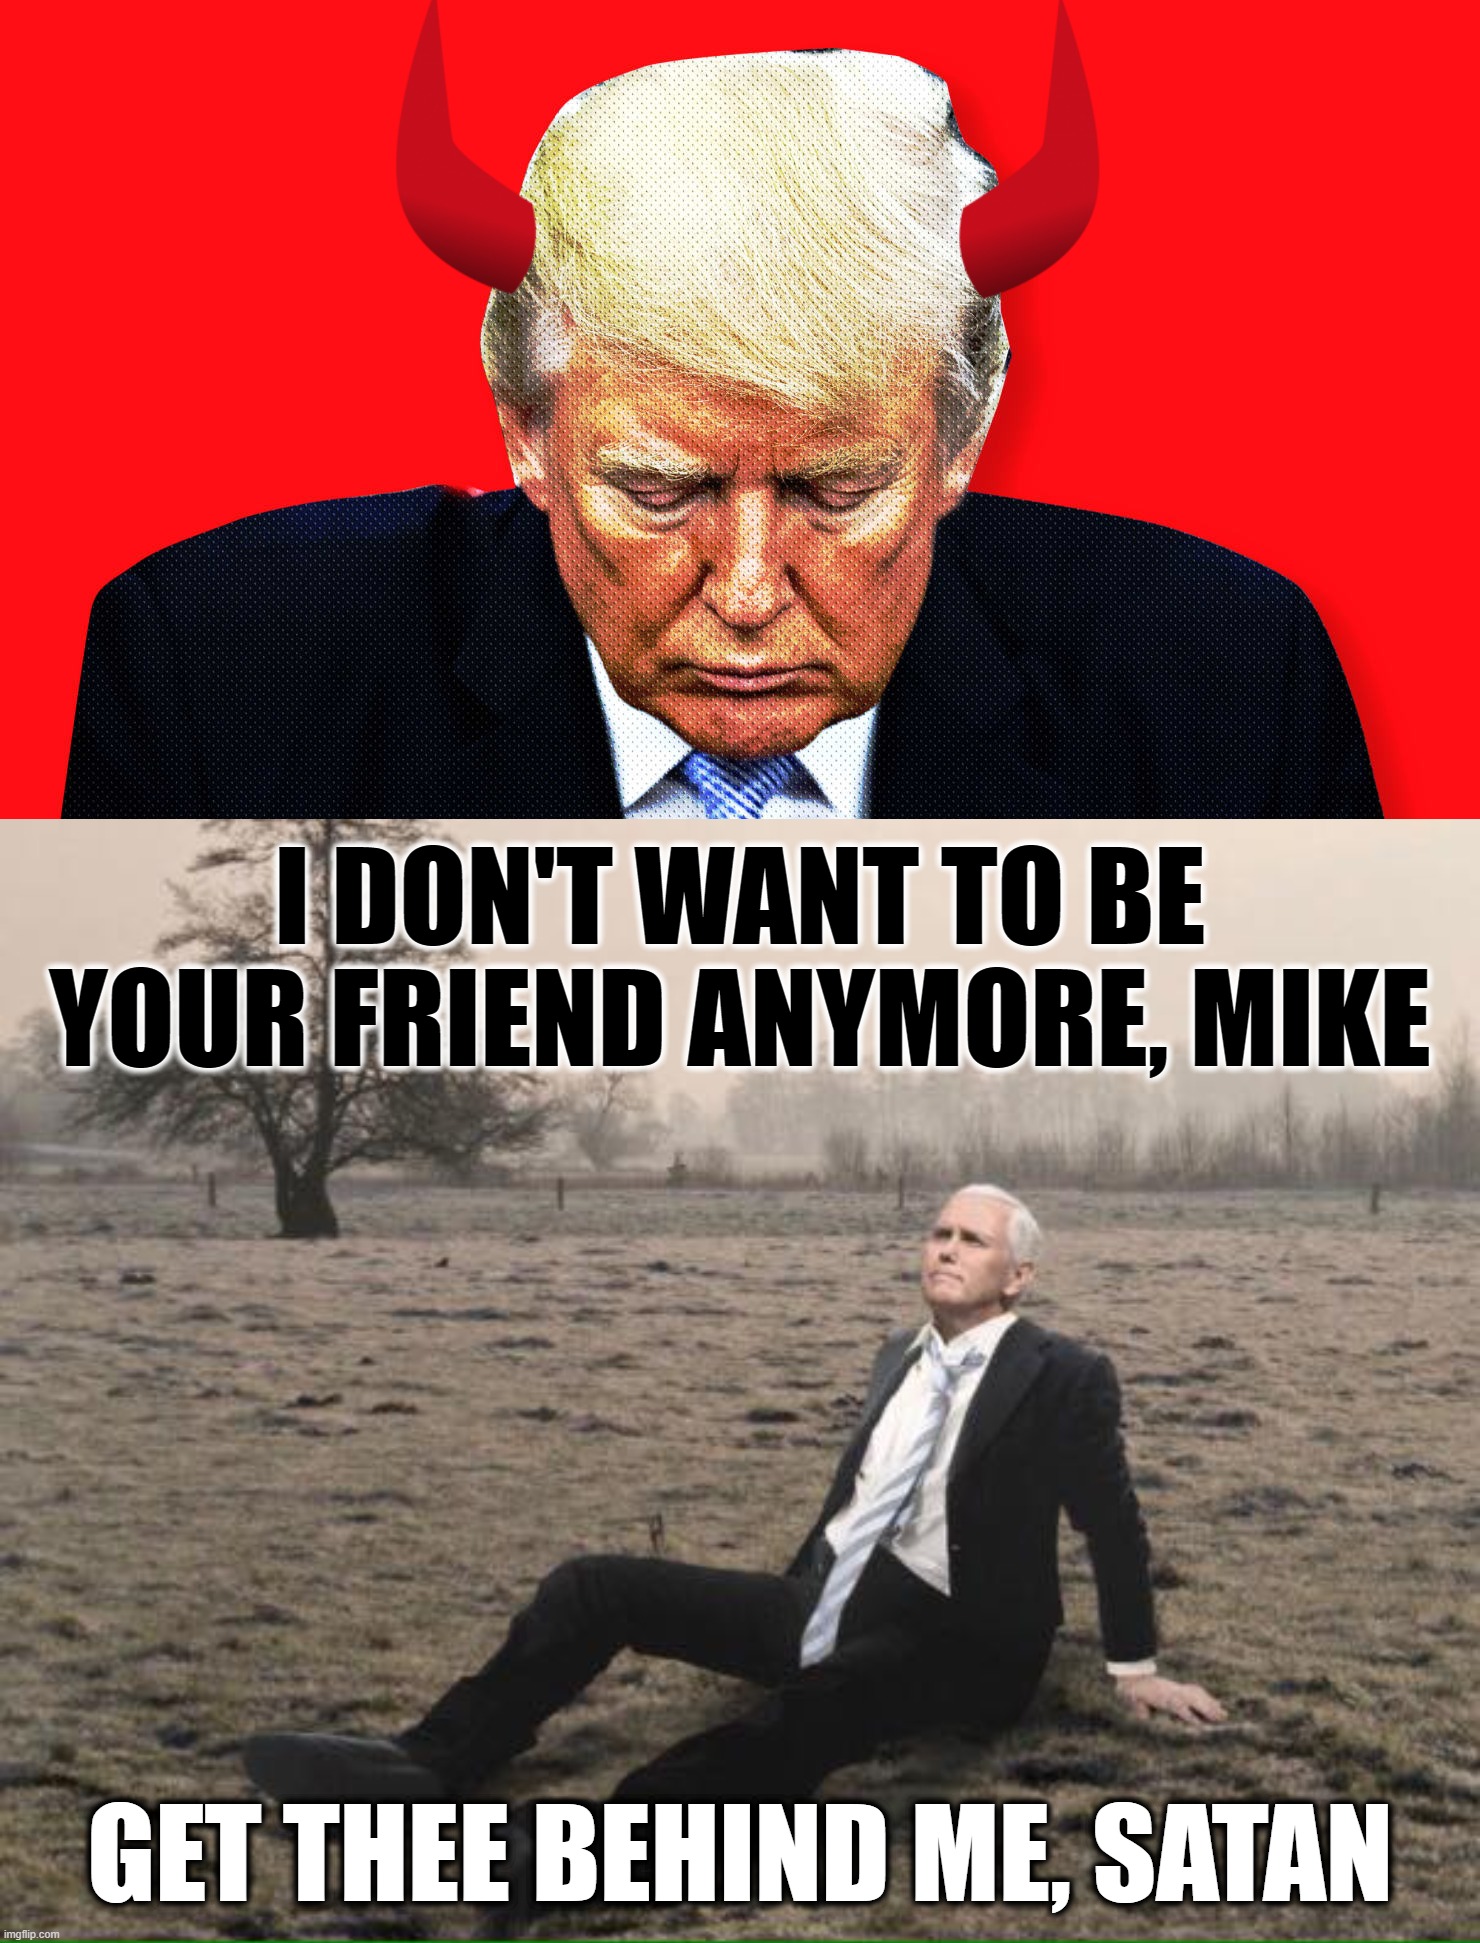 get thee behind me | I DON'T WANT TO BE YOUR FRIEND ANYMORE, MIKE; GET THEE BEHIND ME, SATAN | image tagged in i hate you mike,trump pence,betrayal,not loyal | made w/ Imgflip meme maker